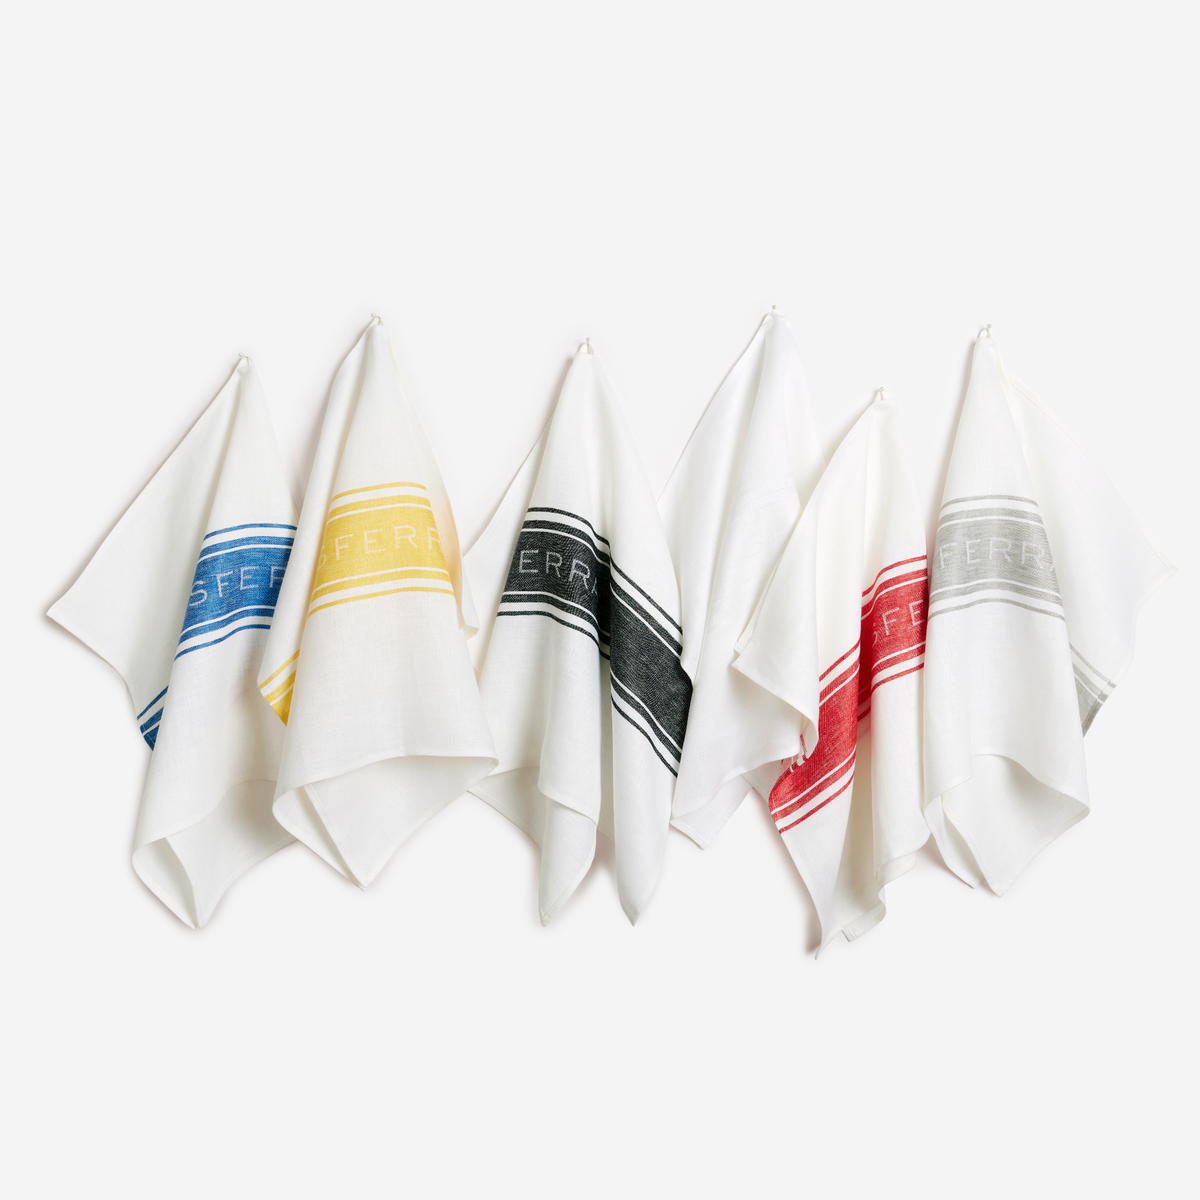 All Colors of Sferra Parma Kitchen Towels Hanging Multi Color Against White Background